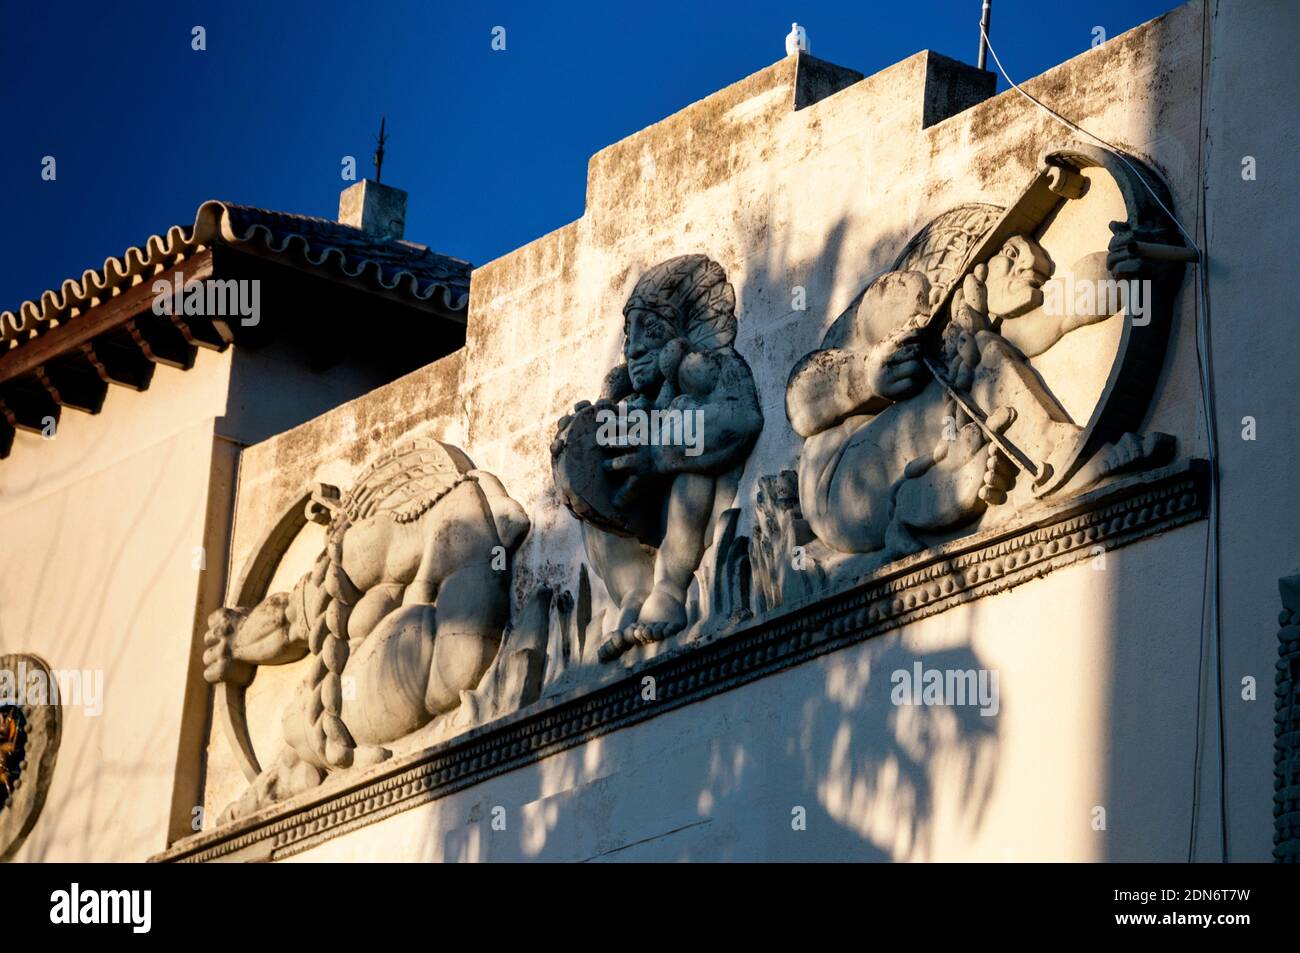 Columbia Pavilion in Seville was inspired by Chibcha, ancient people of modern Columbia, Spain. Stock Photo